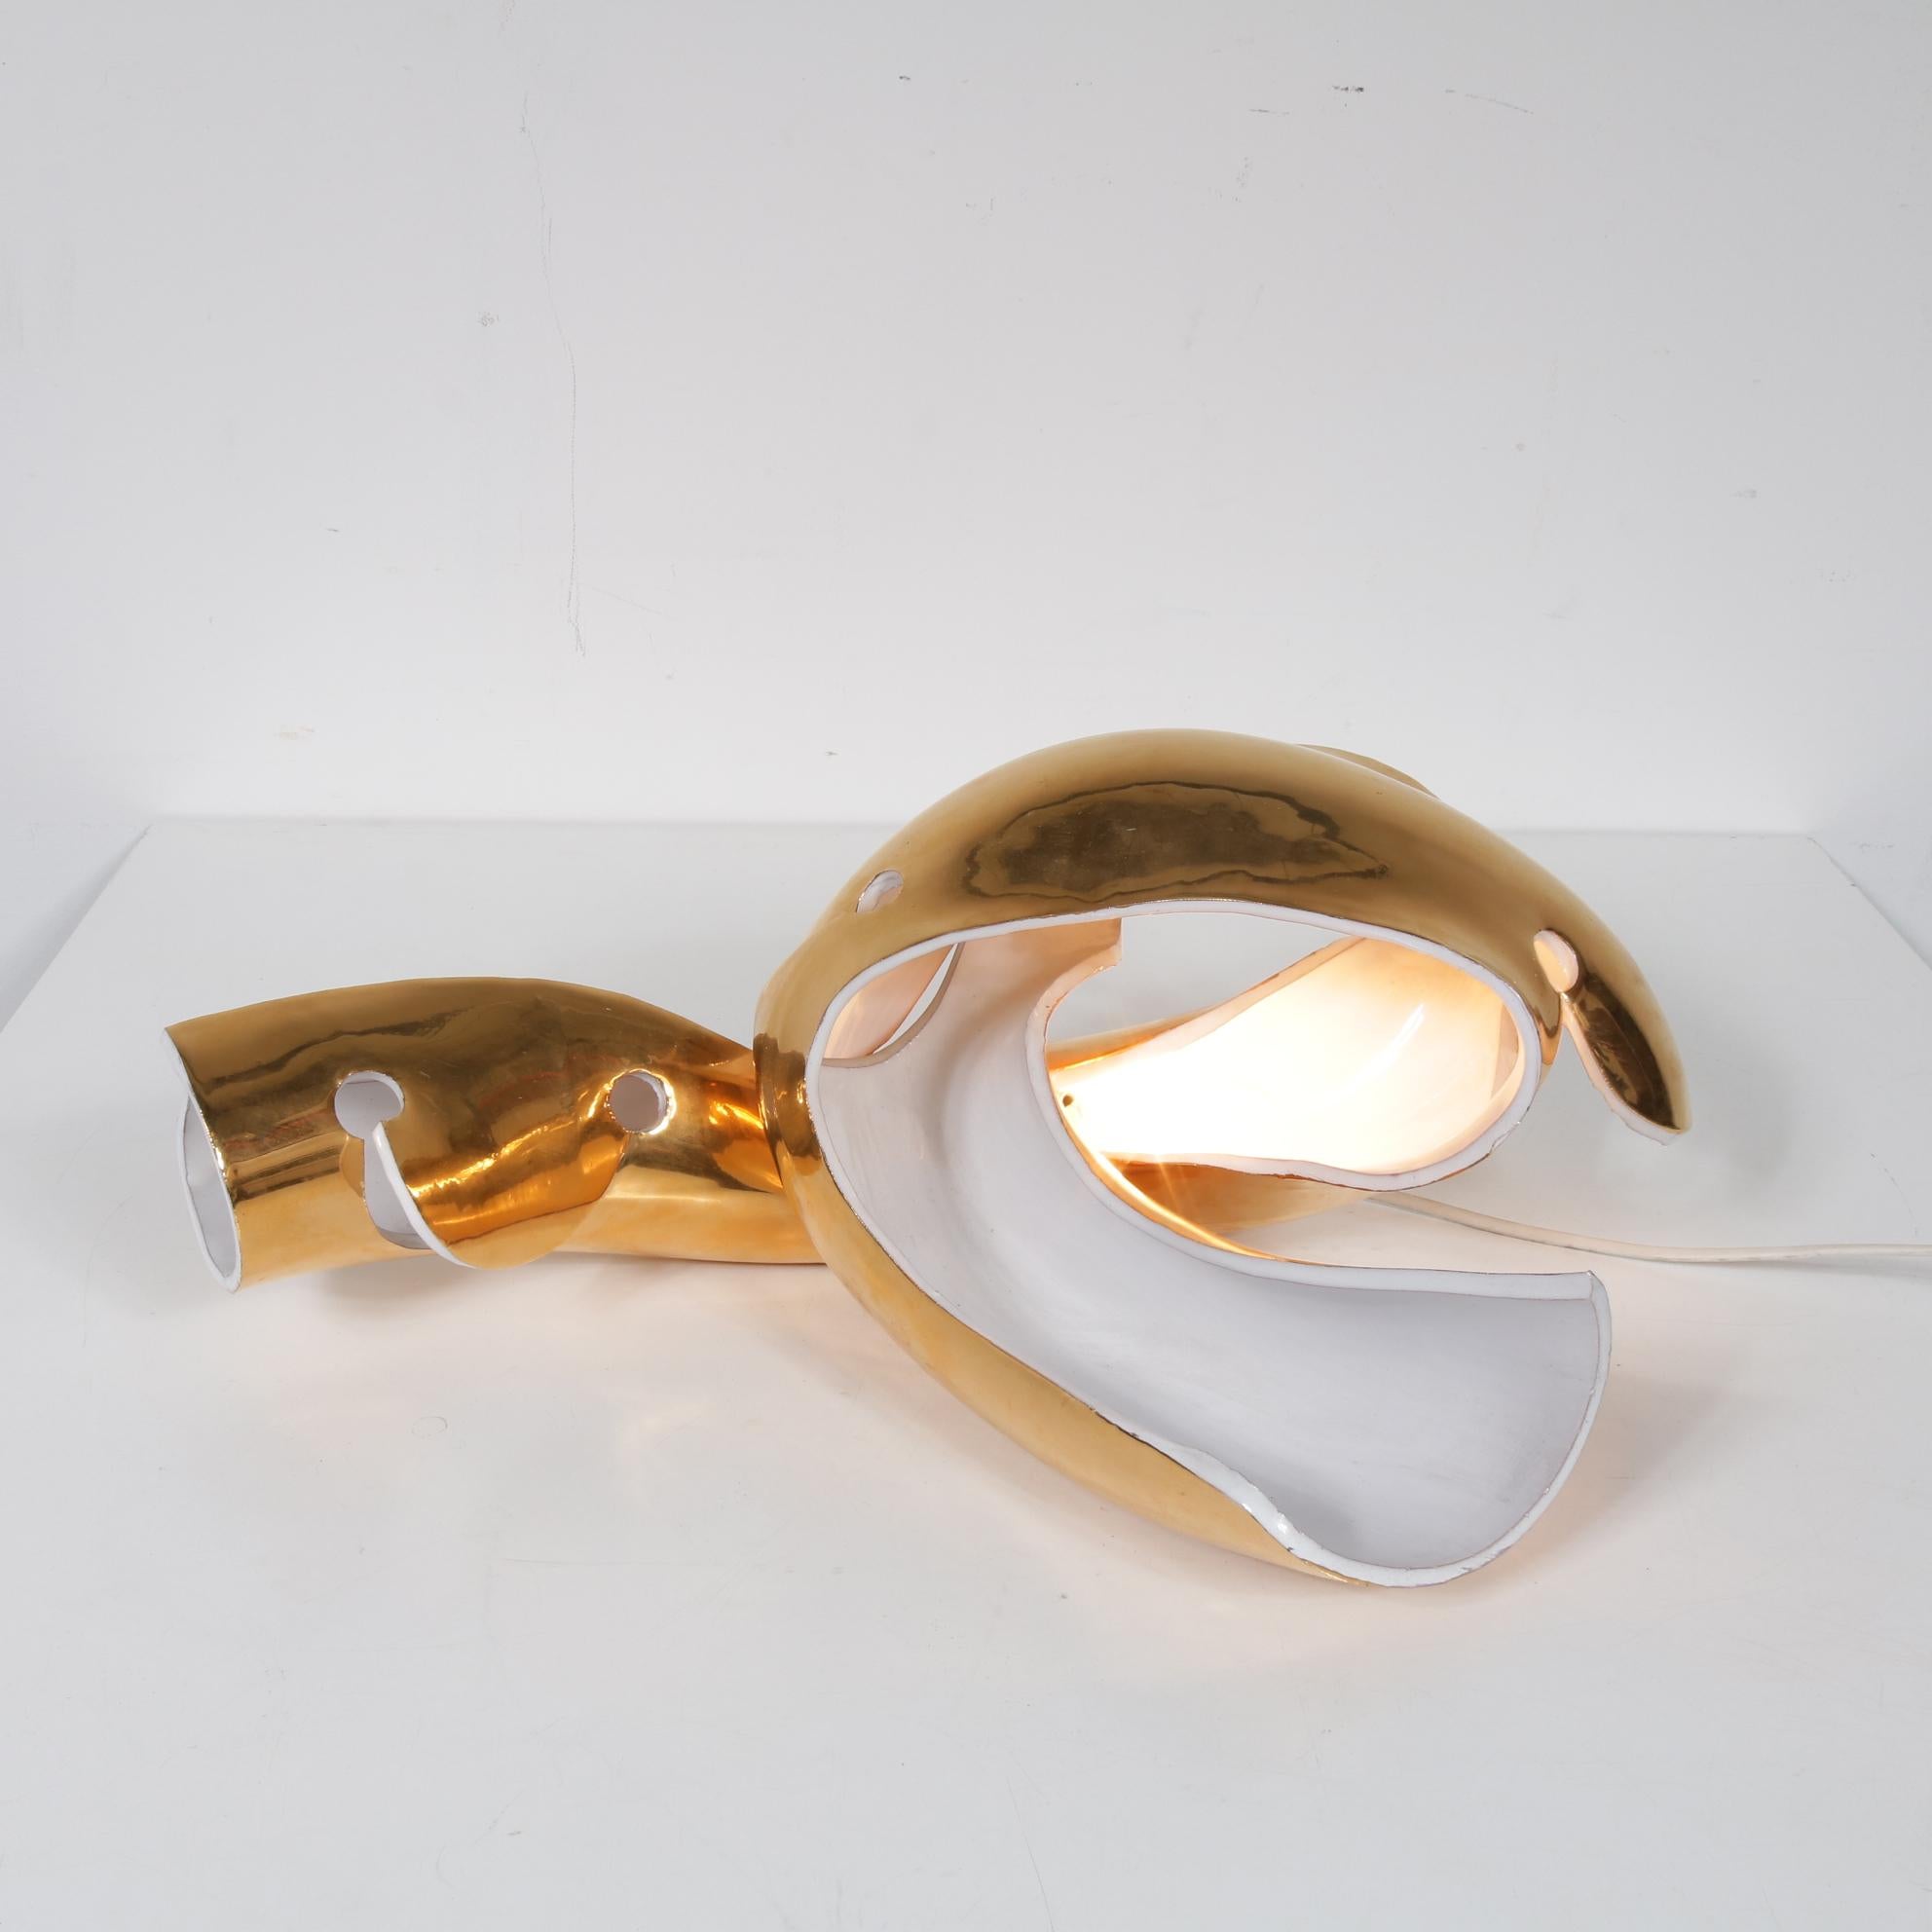 Sculptural Table Light by Amadeo Fiorese for Cermiche Fiorese, Italy 1960 For Sale 4